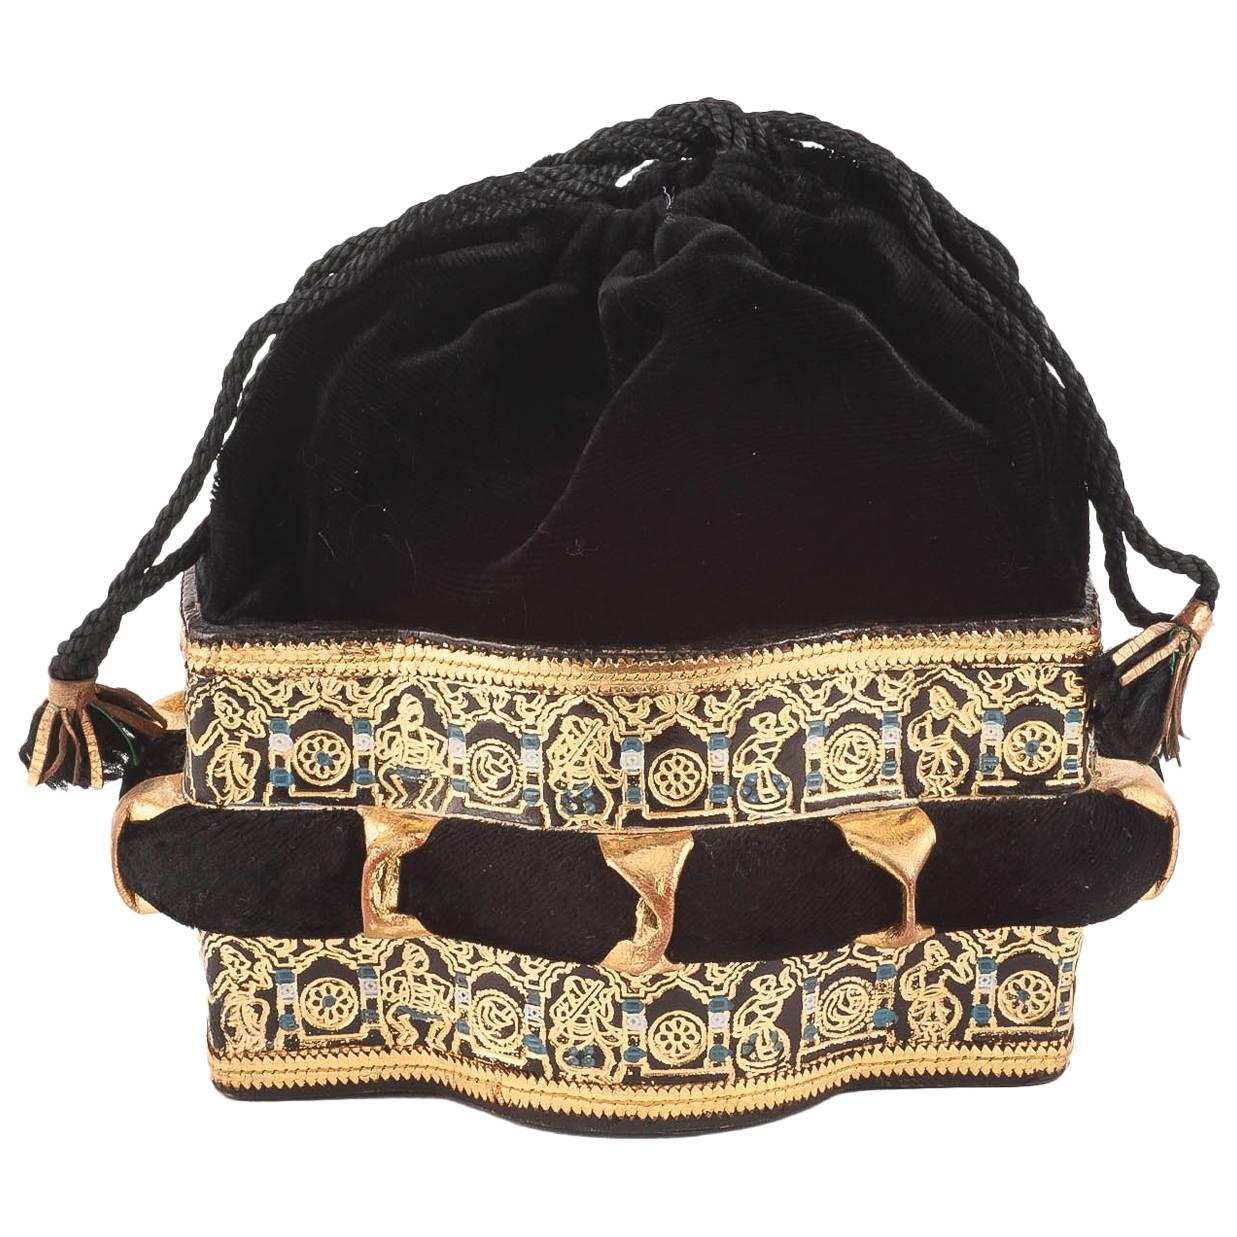 Velvet and stamped leather evening bag, 1940s